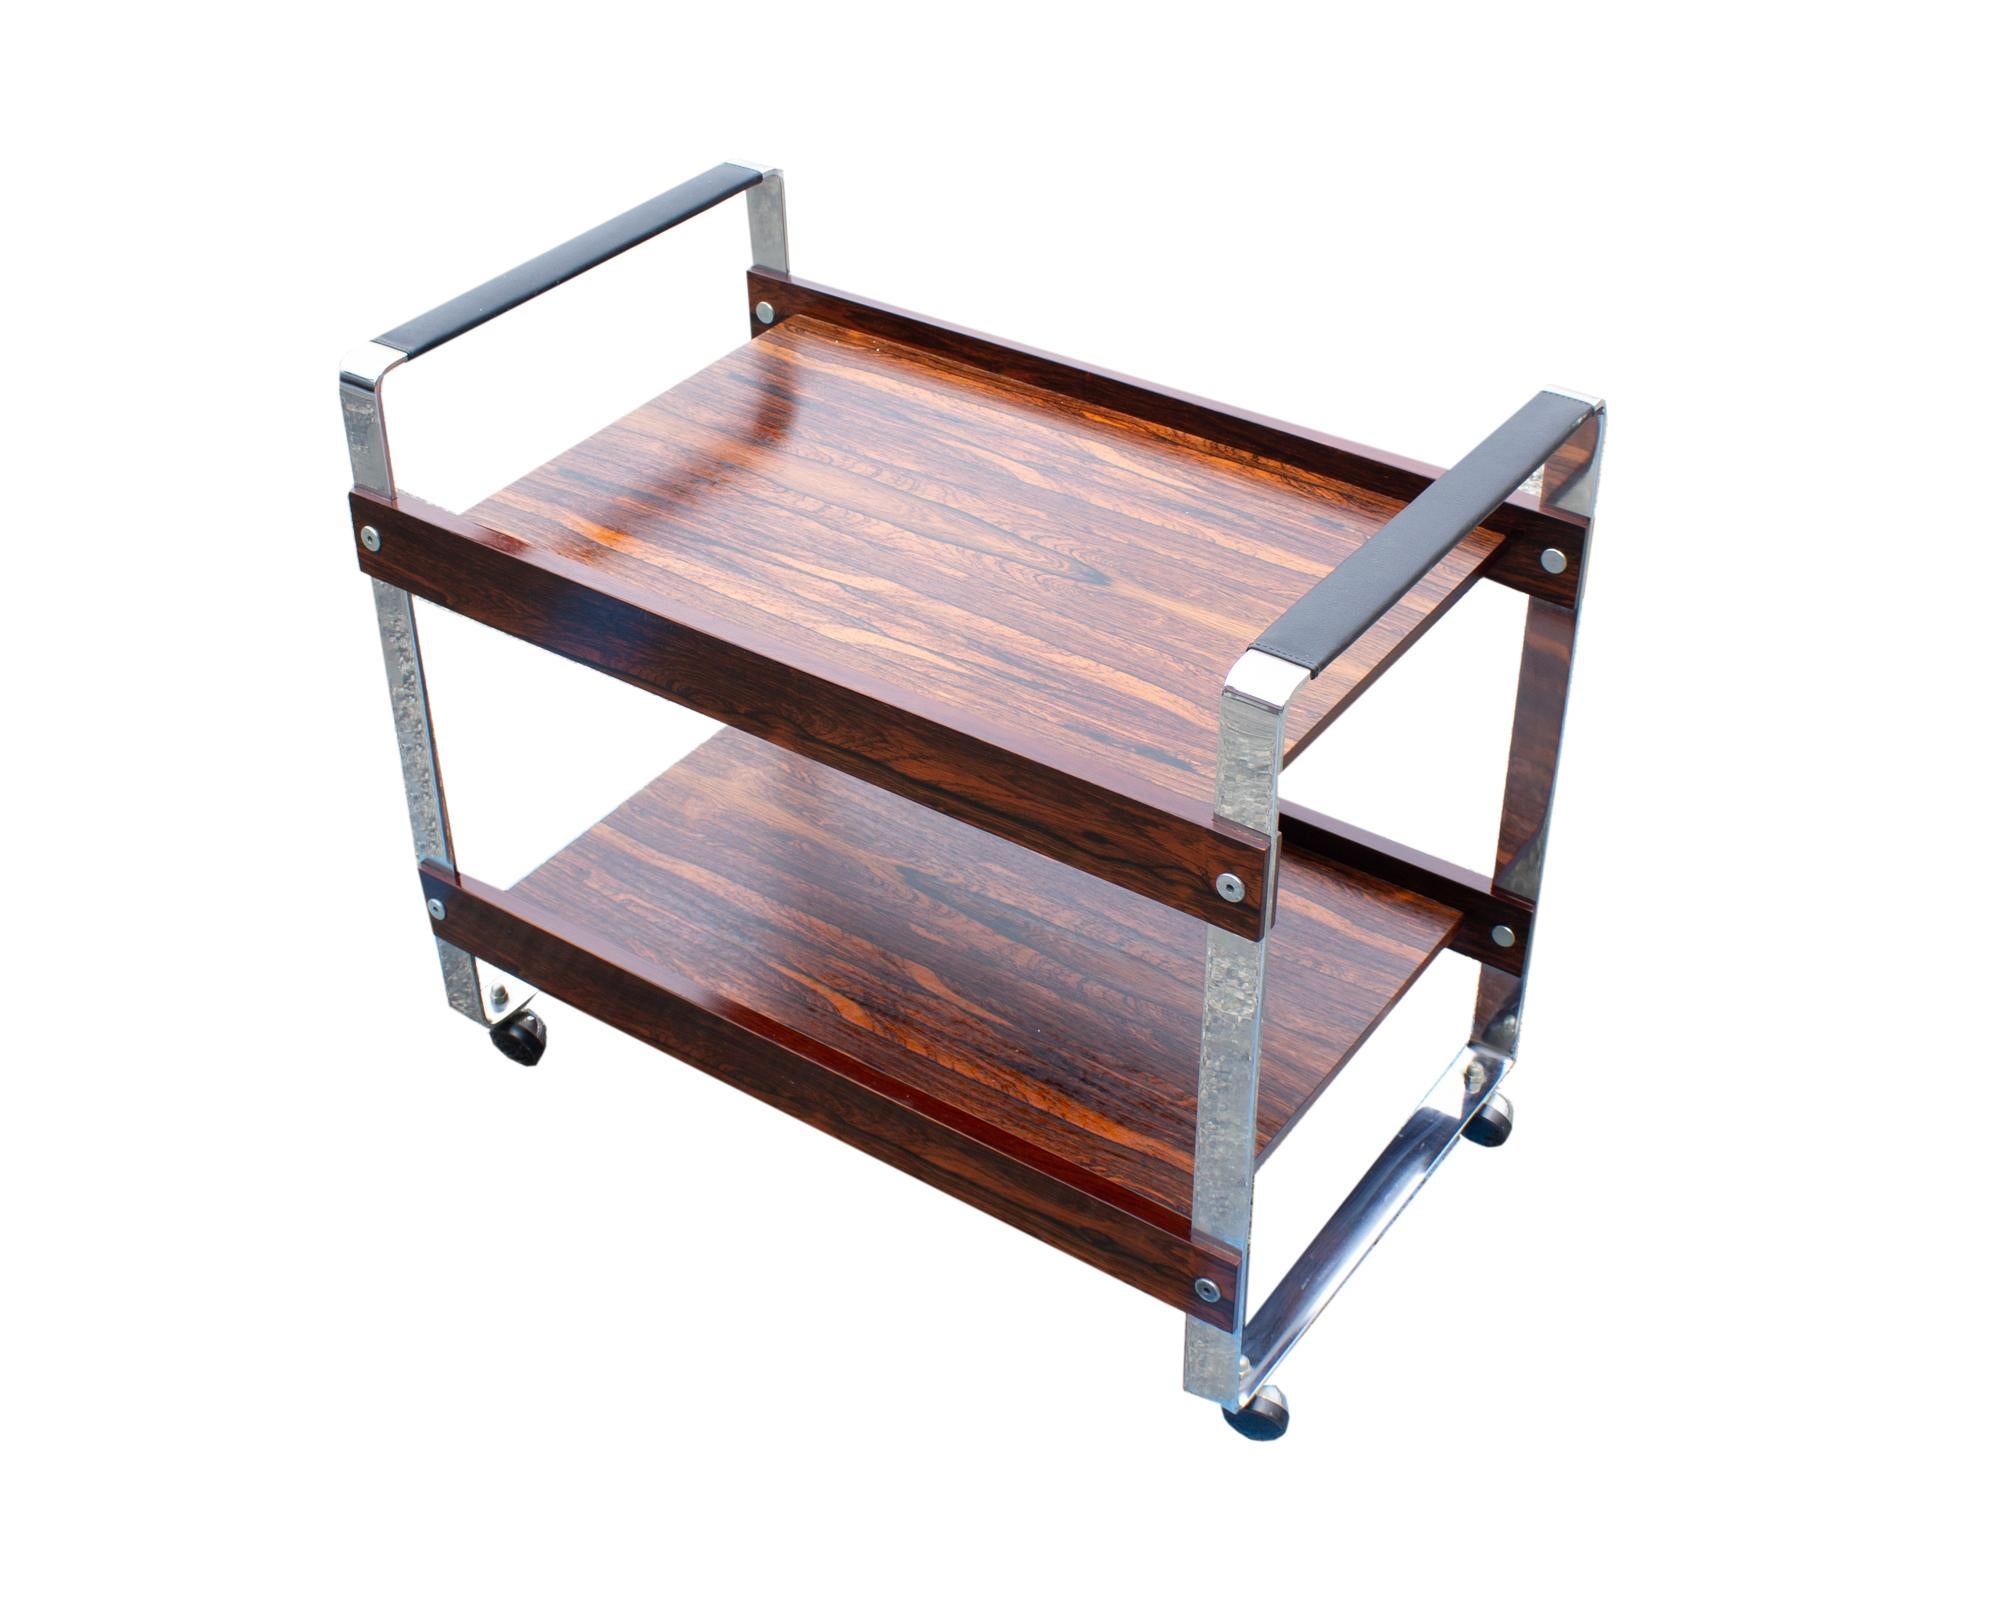 A bar or tea cart designed by the British designer Richard Young. The cart has chrome sides with black faux leather wrapped around the top and two shelves with a rosewood veneer. The car stands on four casters and is unmarked.

